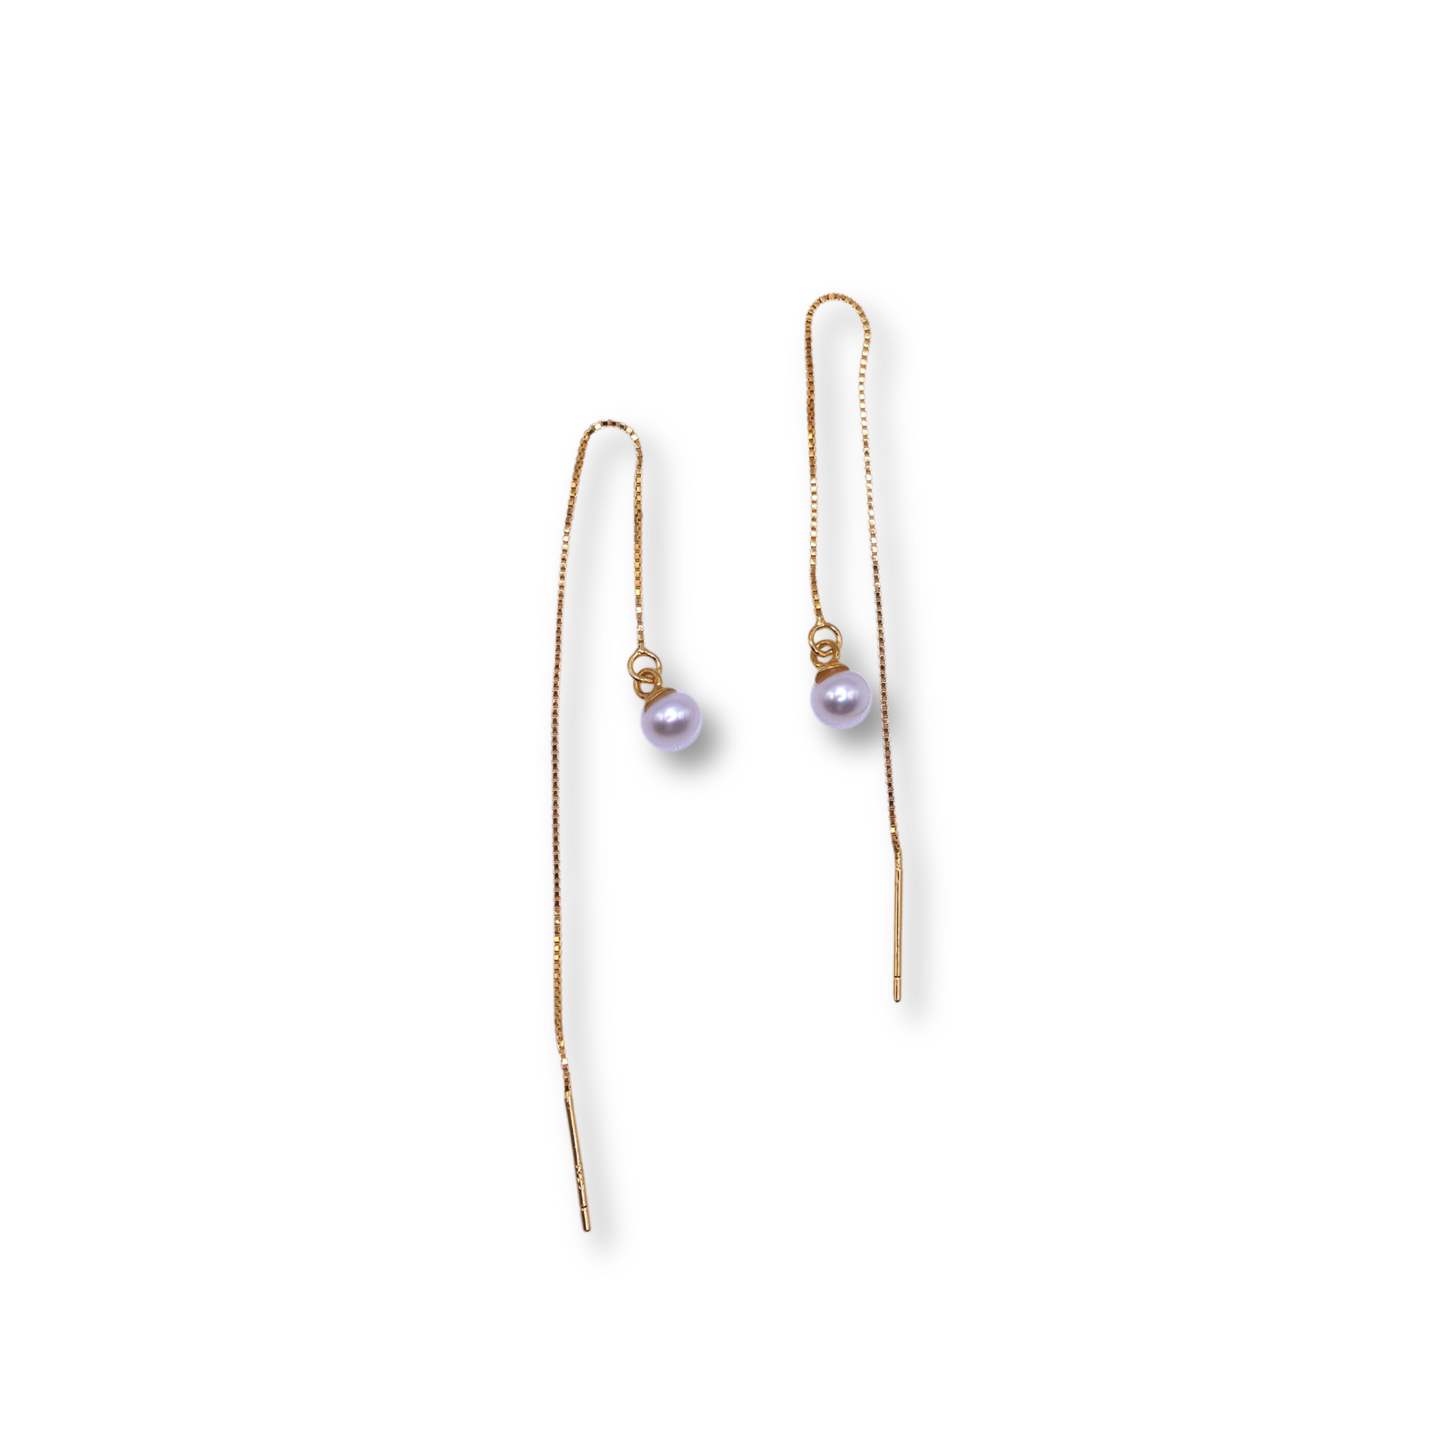 Draper Jewels 24ct Gold Plated Sterling Silver Earring Threads with Freshwater Pearls